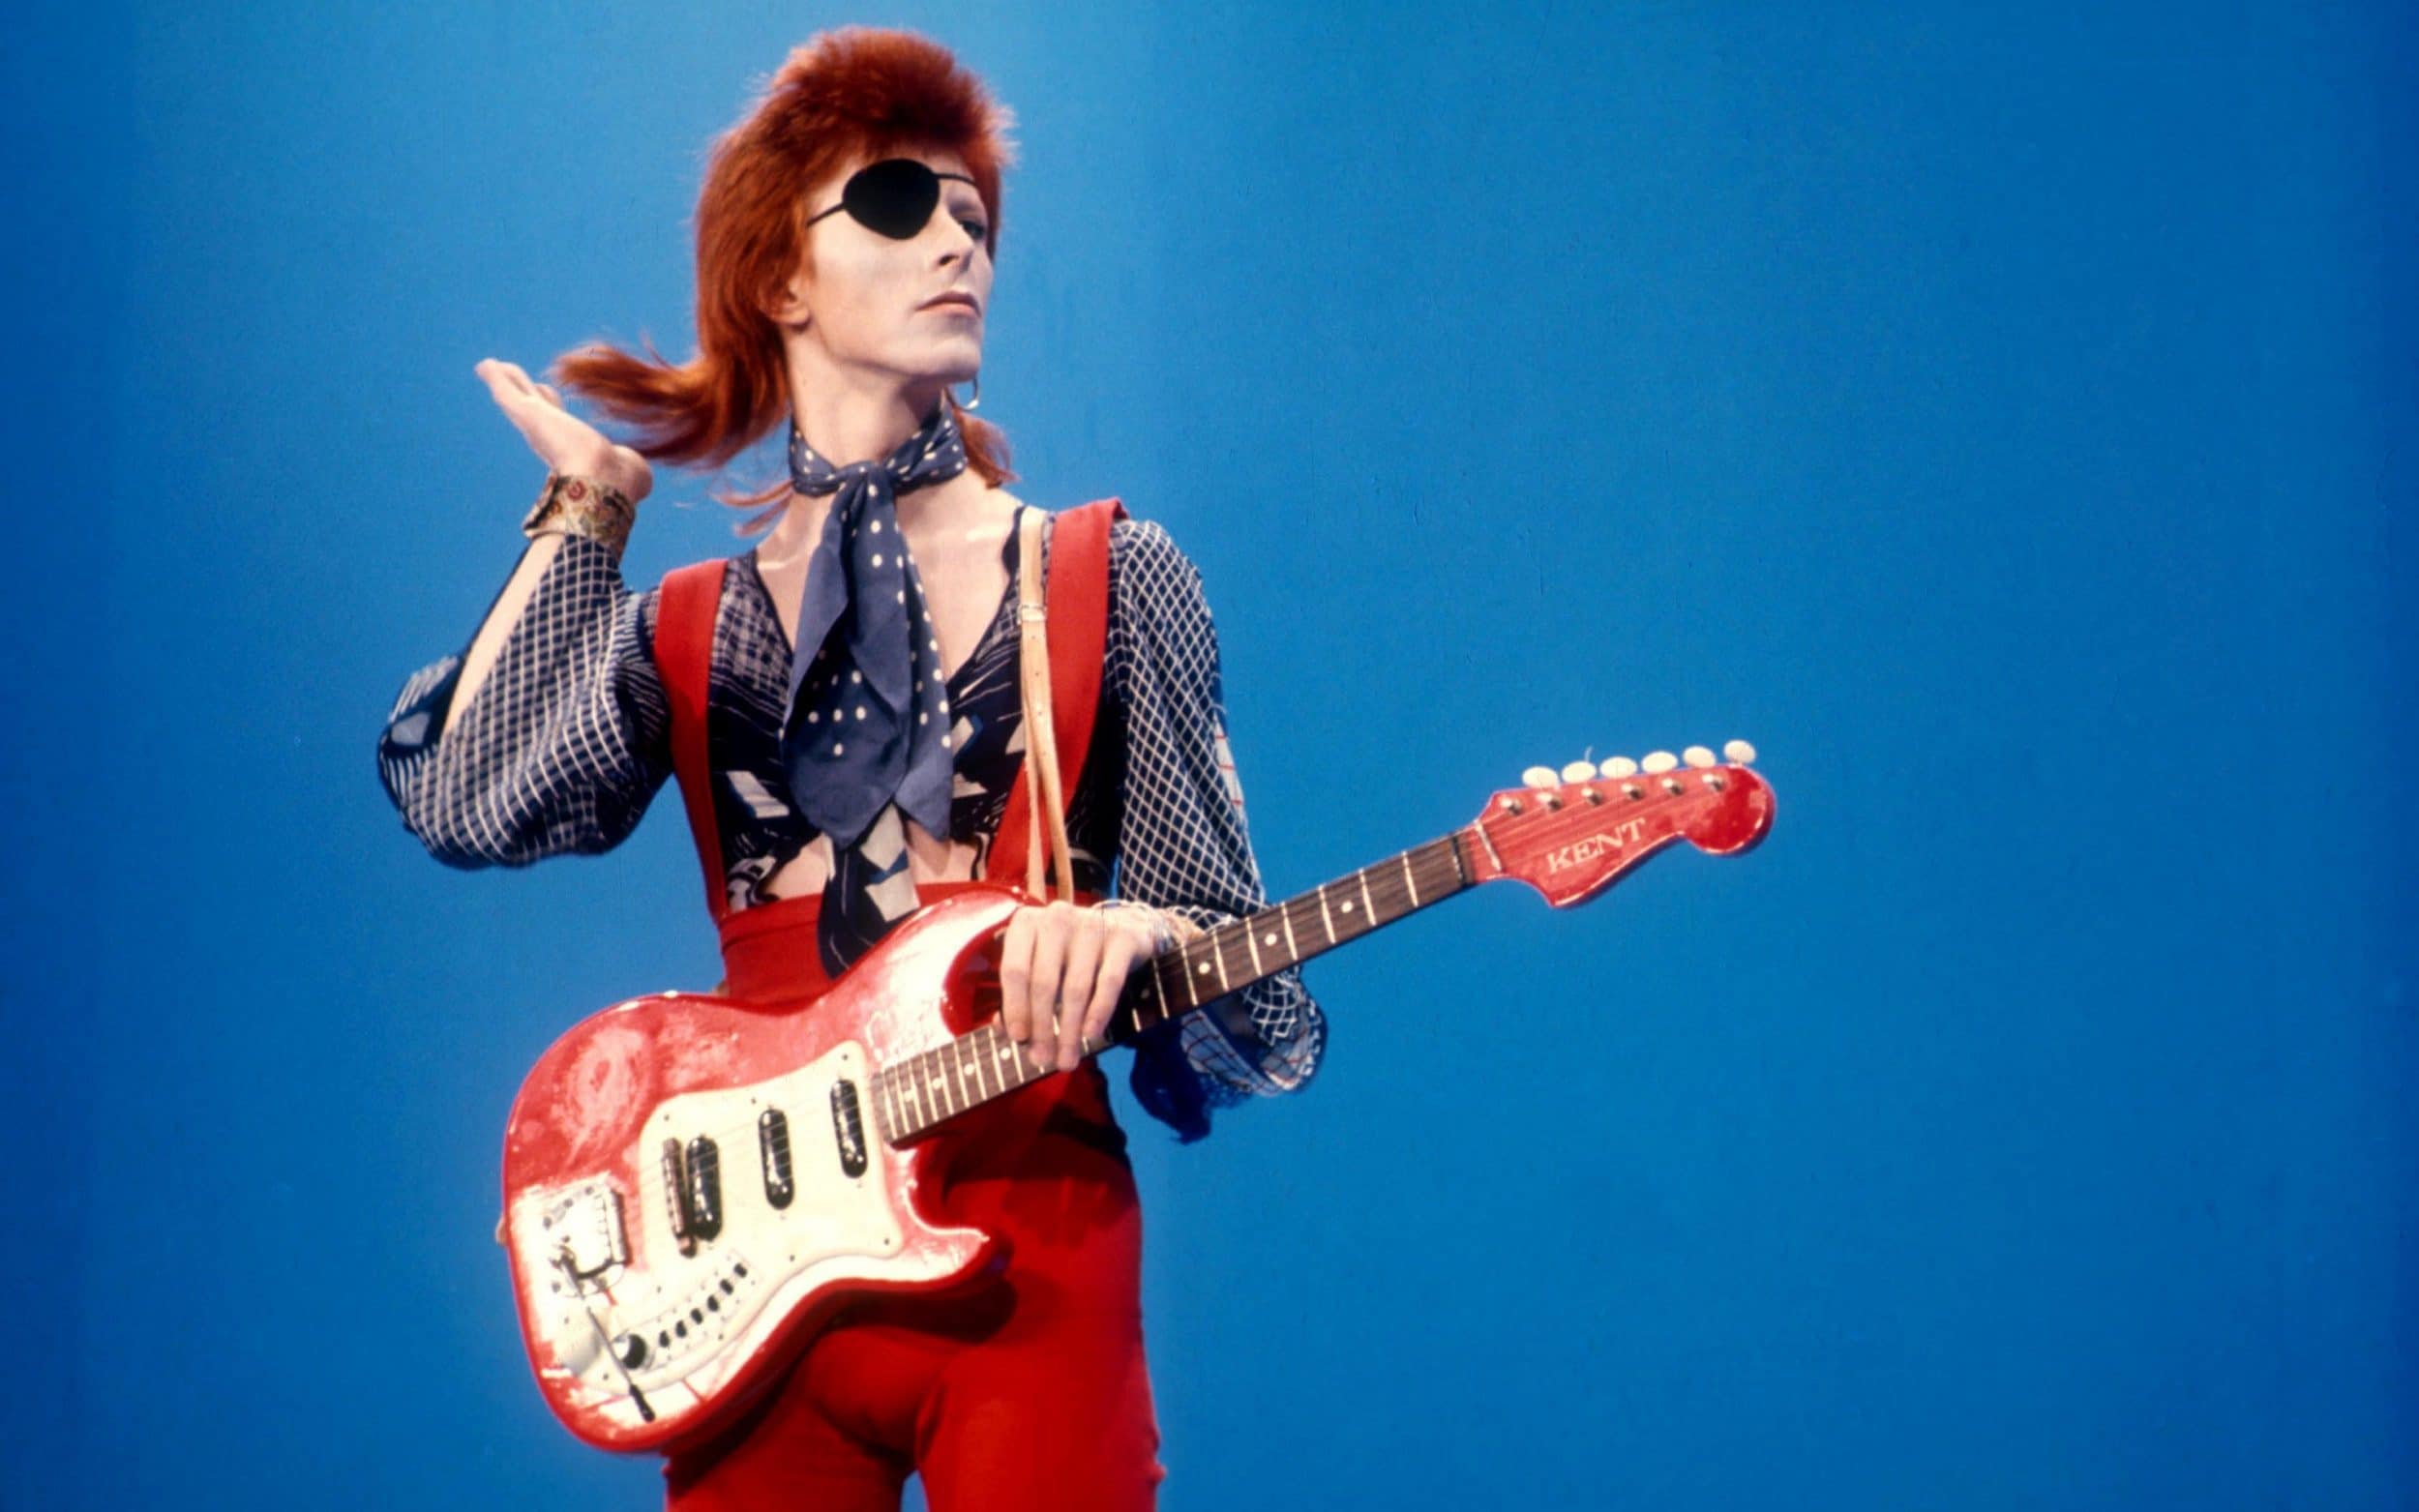 without ‘pretentiousness’, we wouldn’t have bowie or the beatles